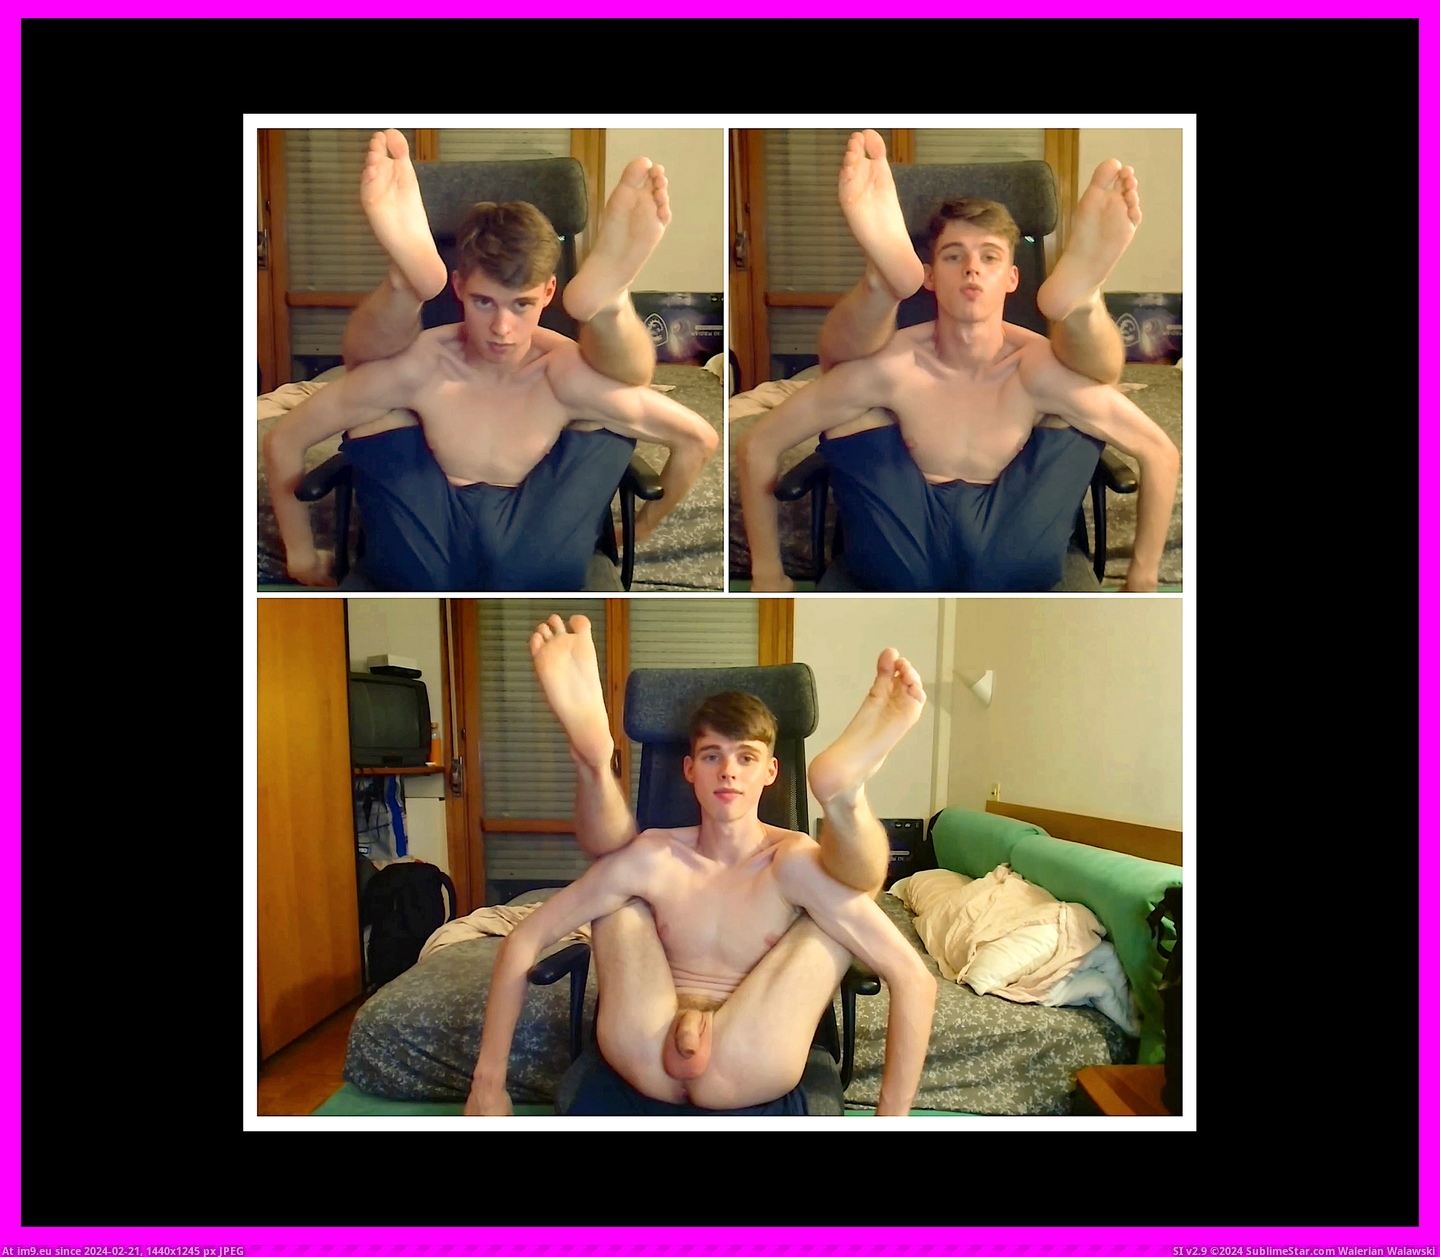 #Amateur #Teen #Nude #Cute #Boy #Unclothed #Flexible #Gay #Babe #Twink #Clothed Clothed Unclothedd Aamteur Flexible Babe Pic. (Image of album ))